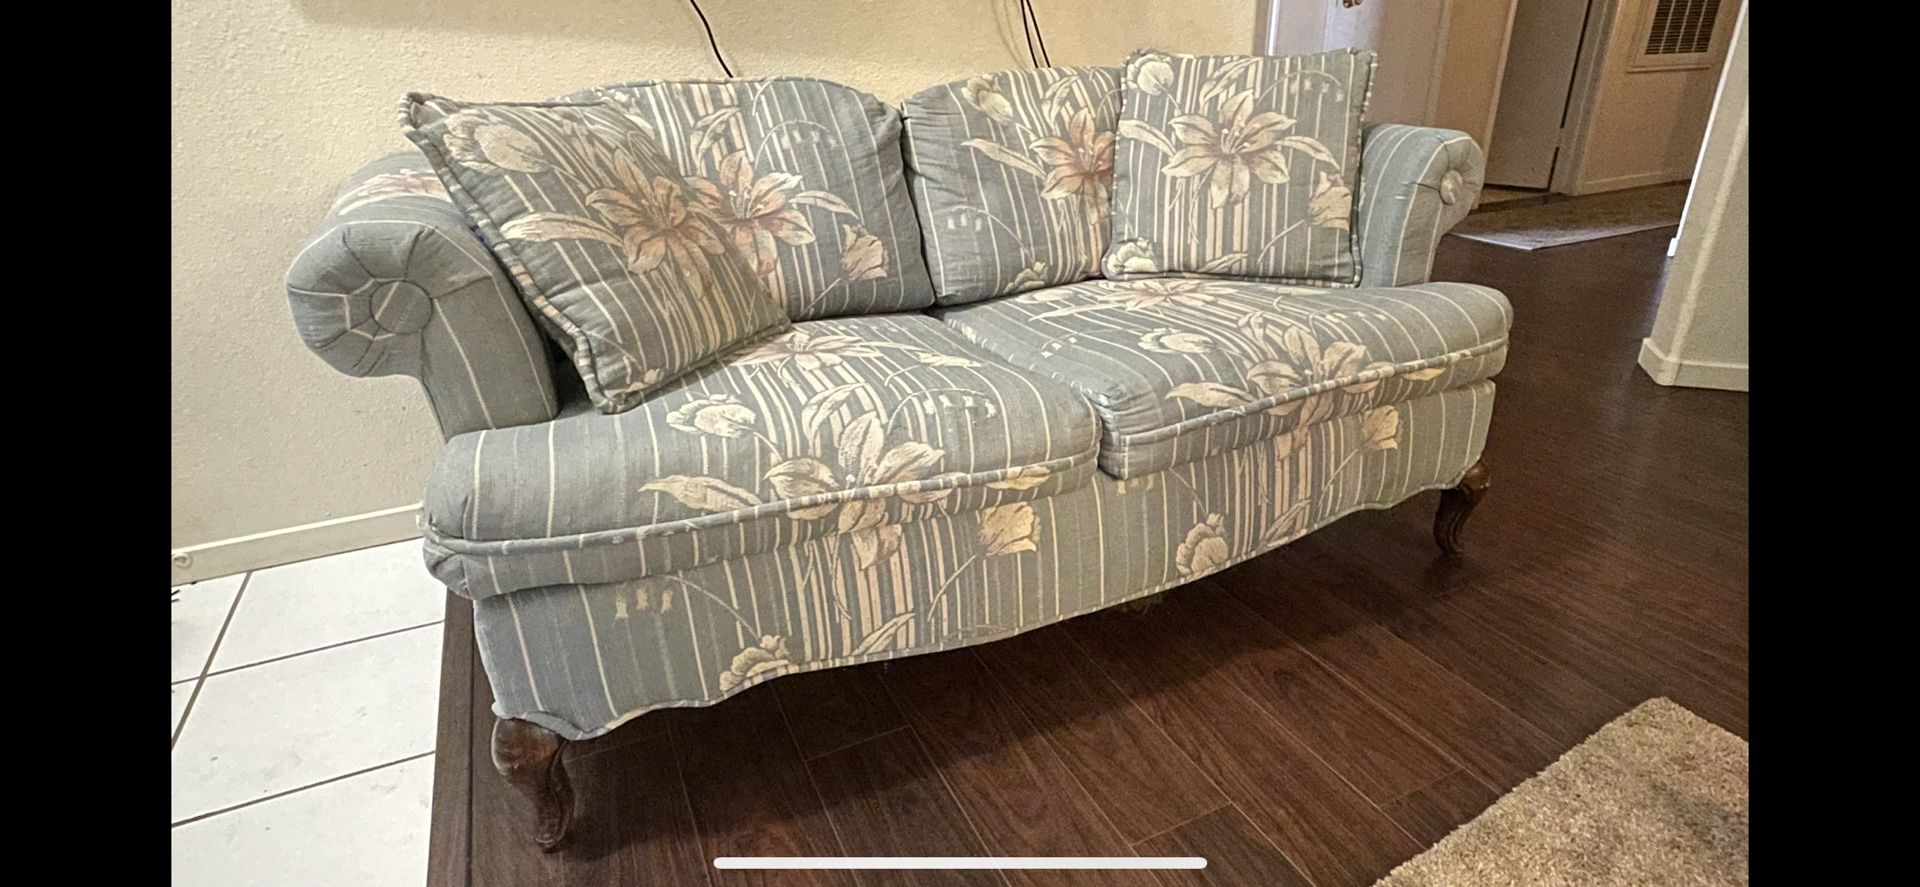 Vintage Couch Set (2 Couches and 1 Wingback Chair)